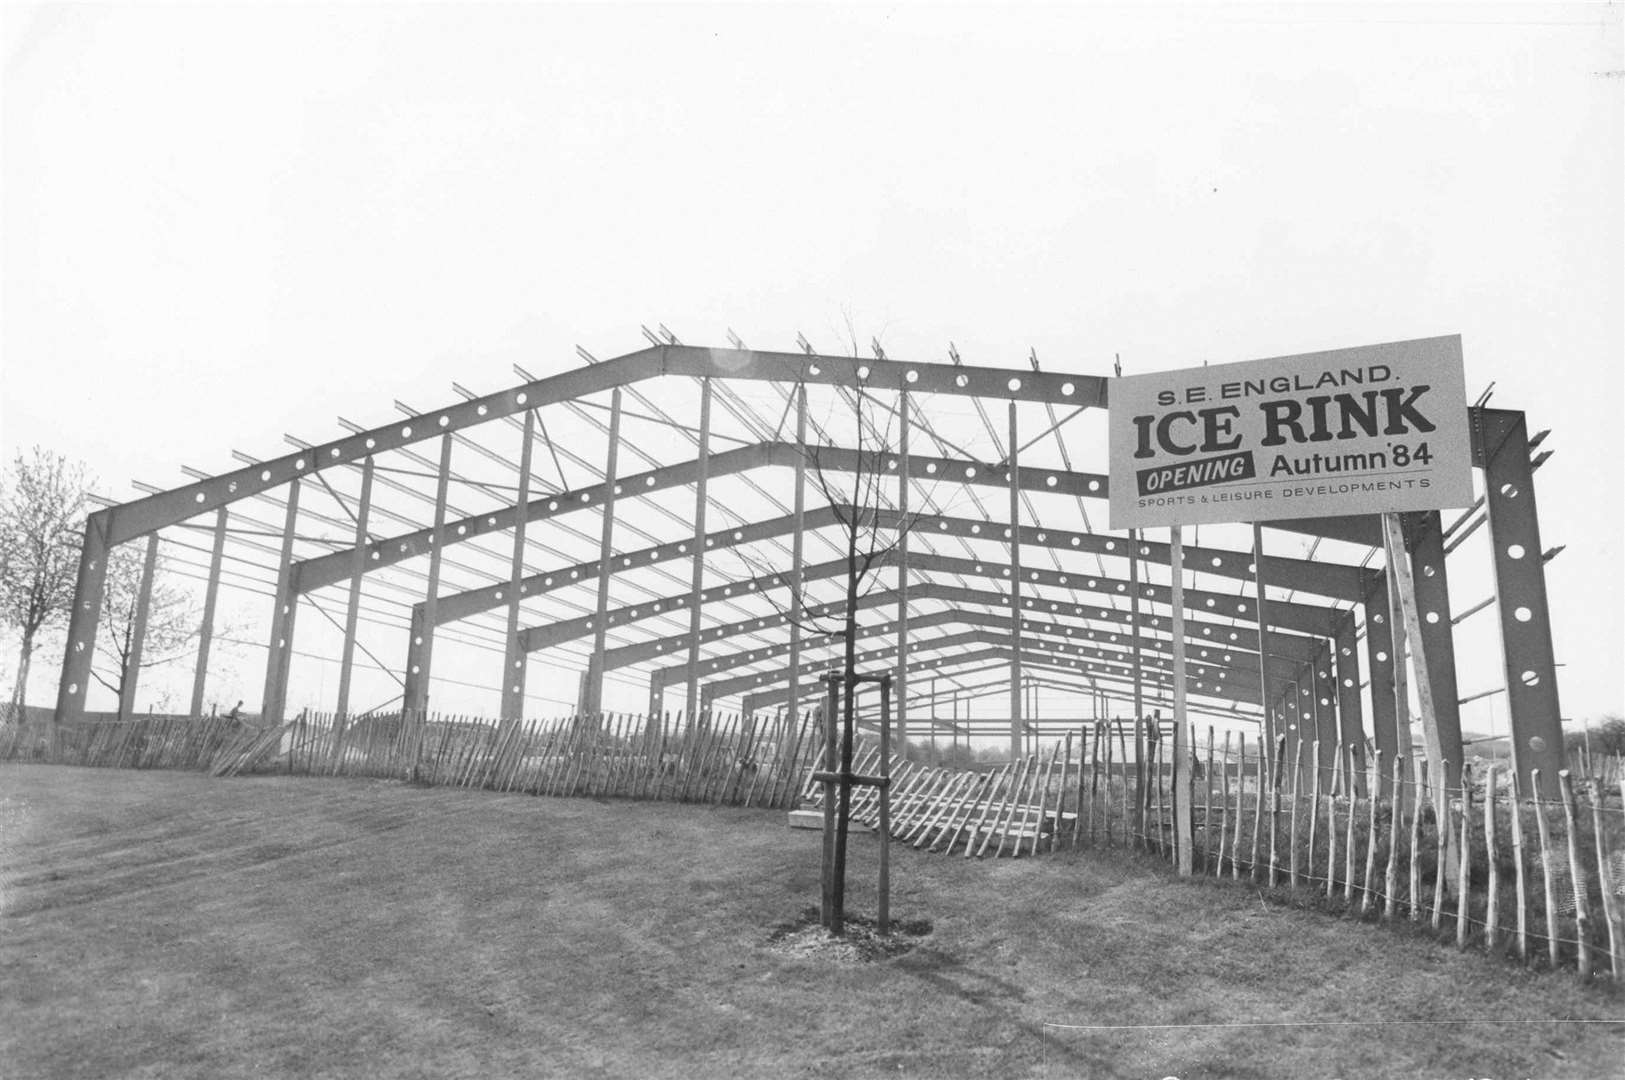 The construction of Gillingham ice bowl in 1984. The £1m complex at Gillingham Business Park was designed to cater for 1,200 skaters and former Olympic gold medalist Robin Cousins was appointed director of coaching